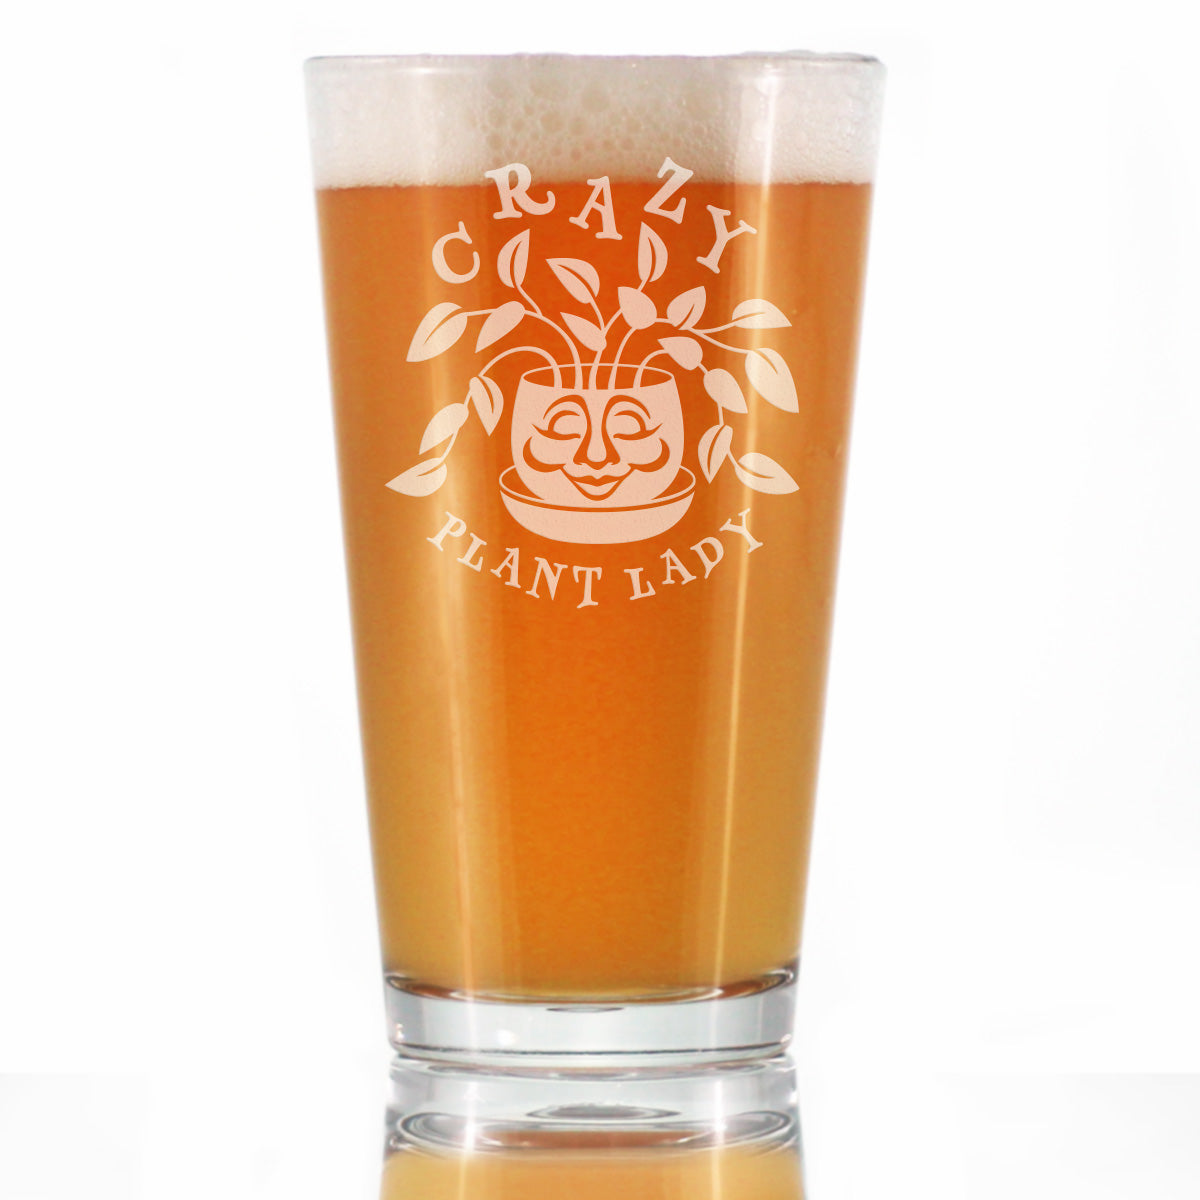 Crazy Plant Lady - Pint Glass for Beer - Gardening Themed Gifts and Decor for Gardeners - 16 oz Glass